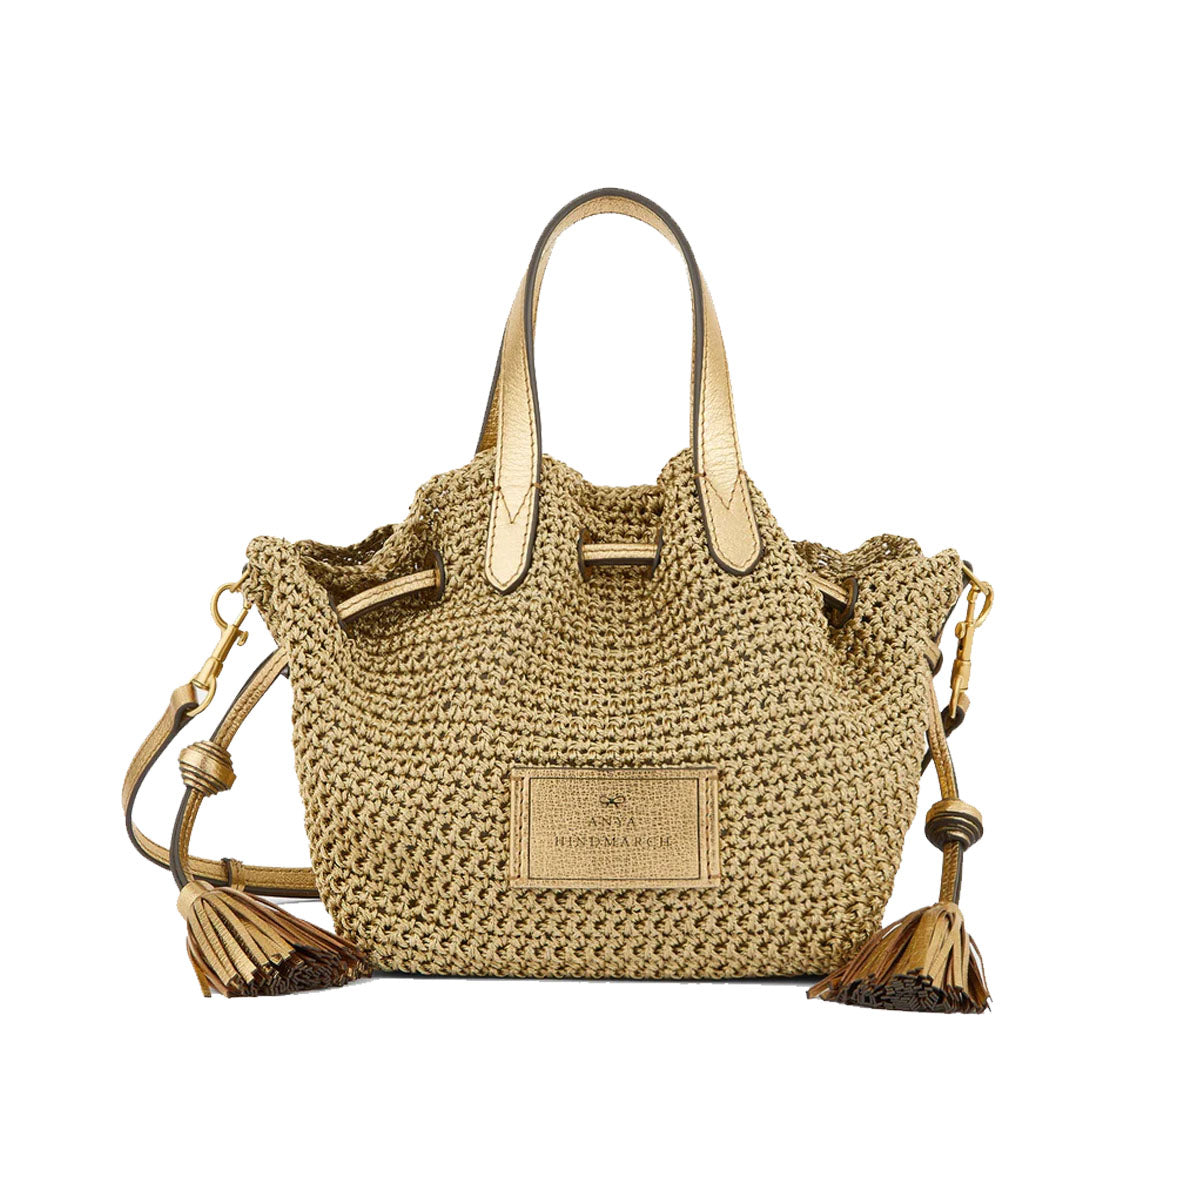 Lurex Drawstring Small Tote in Metallic Gold Leather - Anya Hindmarch